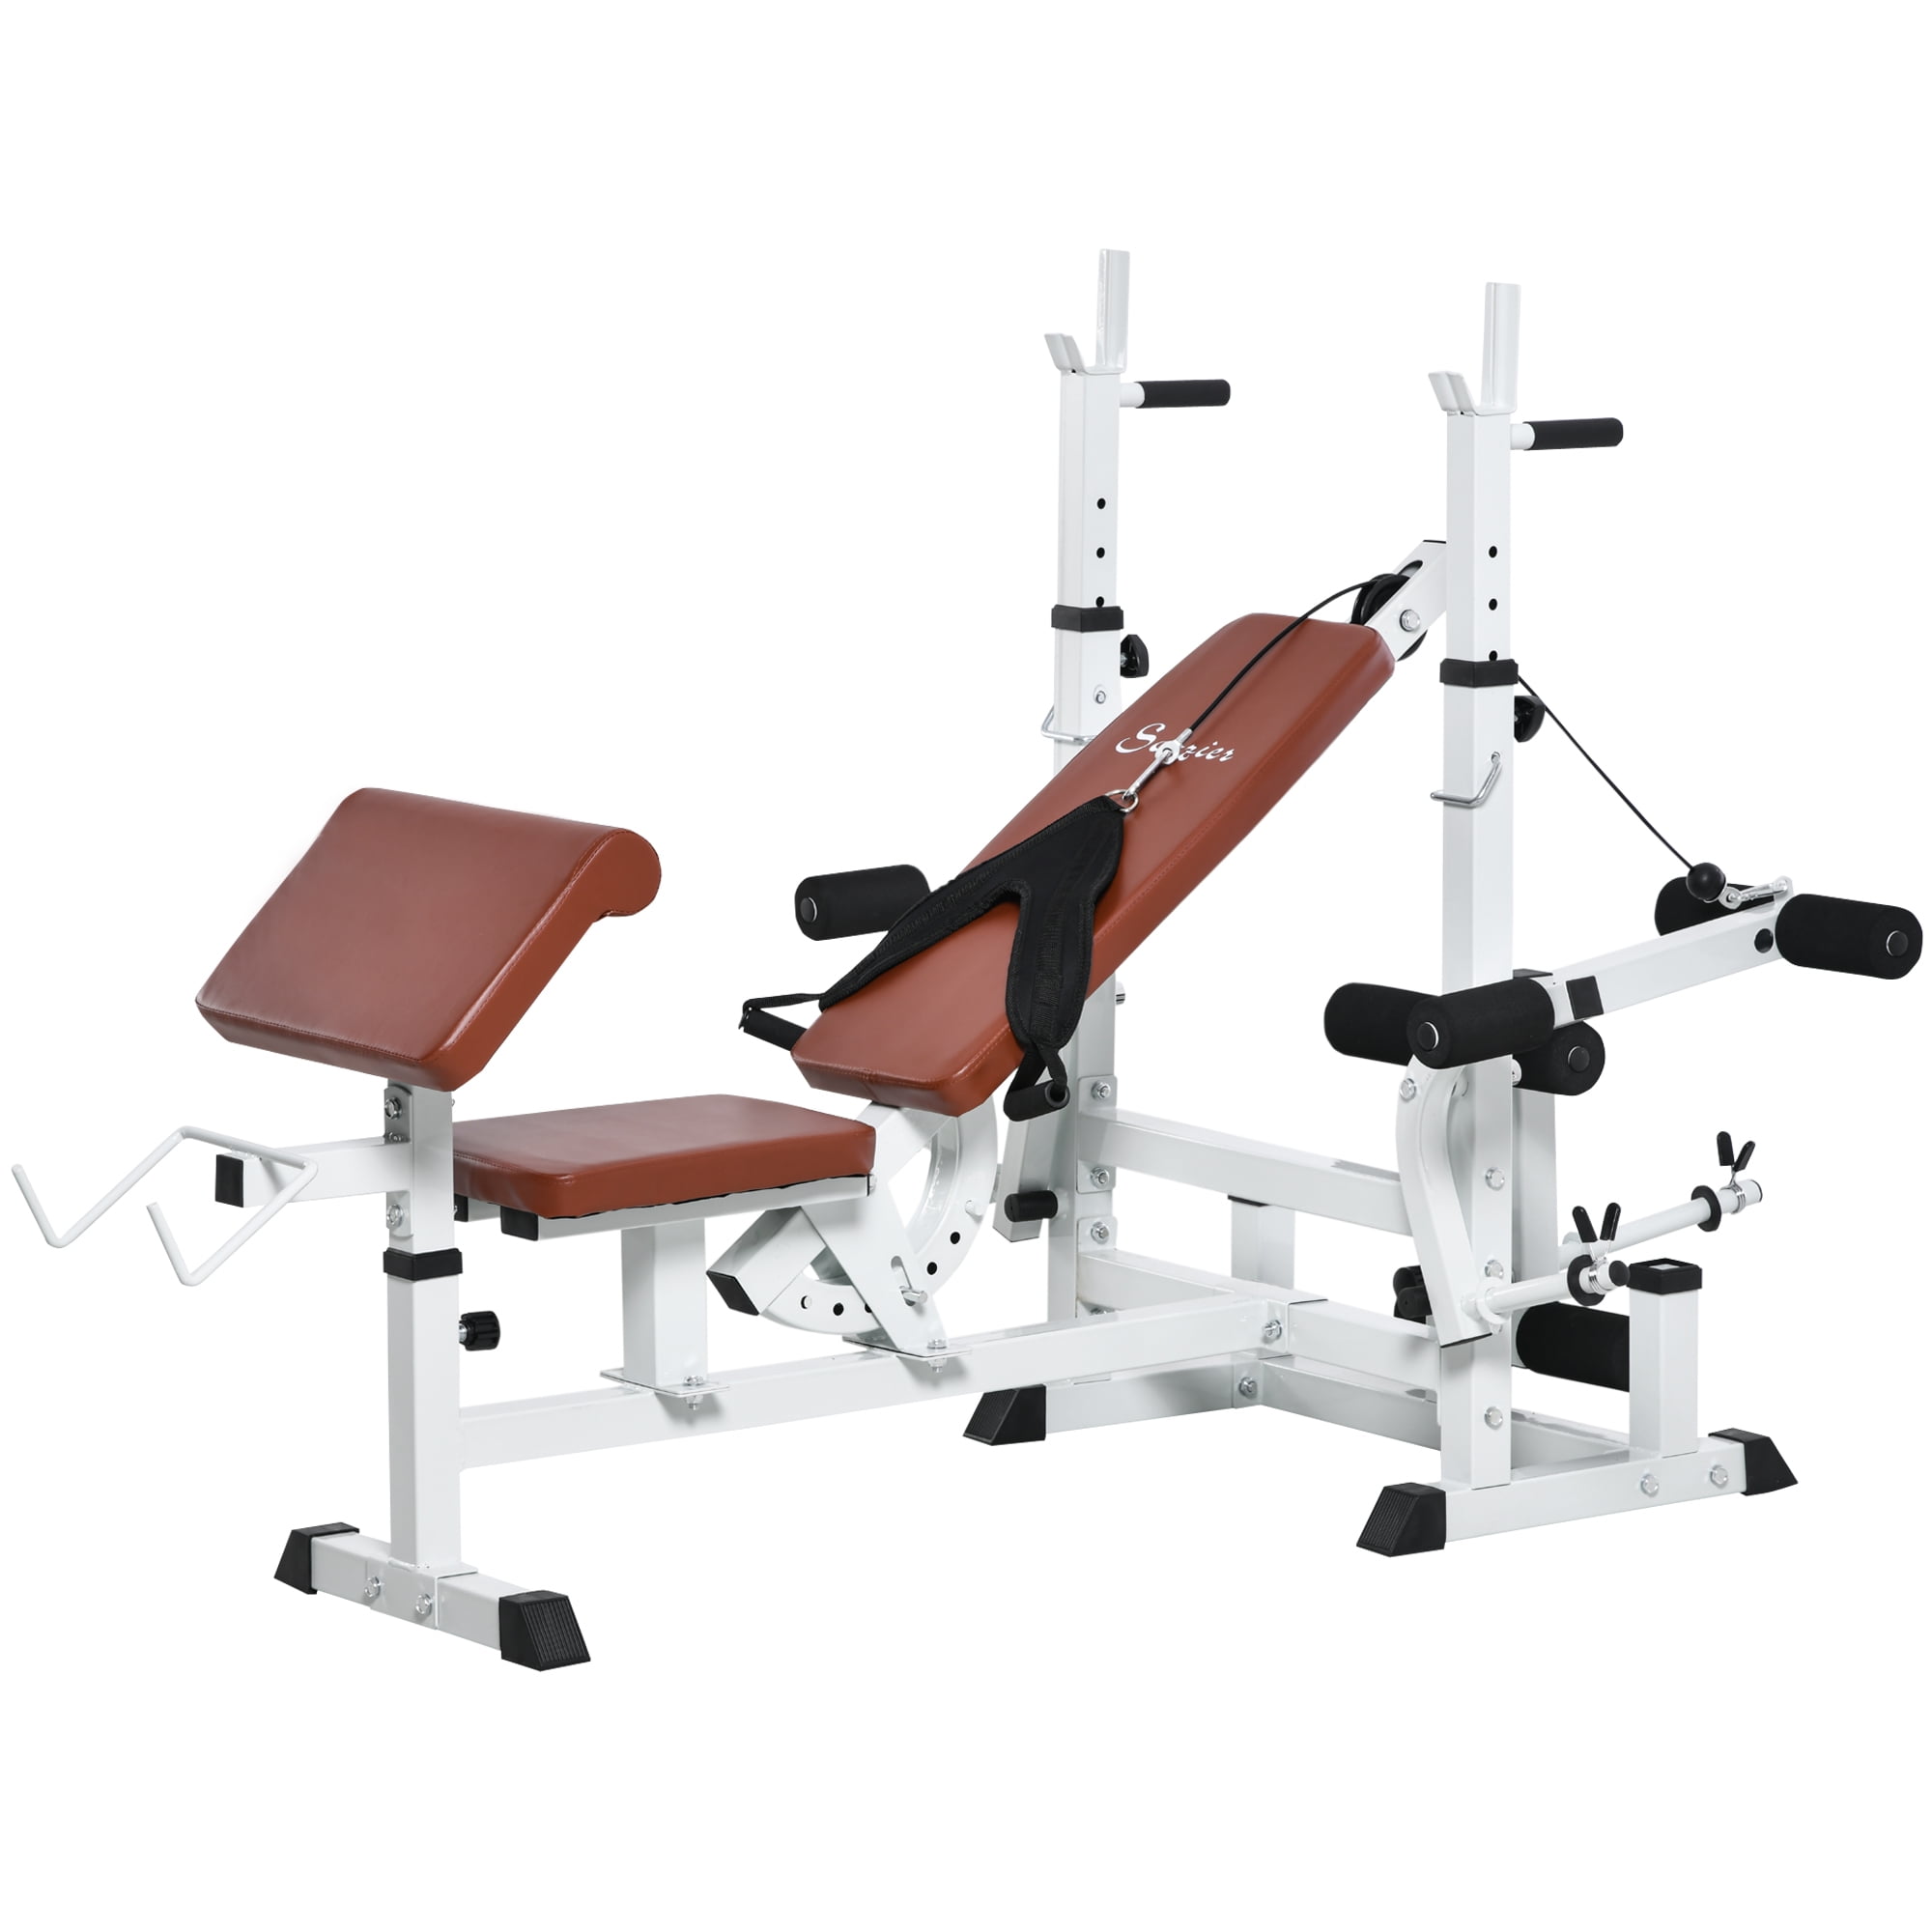 Soozier Preacher Extension, Fly Resistance Chest Full-Body Press, Multi-Exercise Leg Curl Weight Rack with Band and Bench